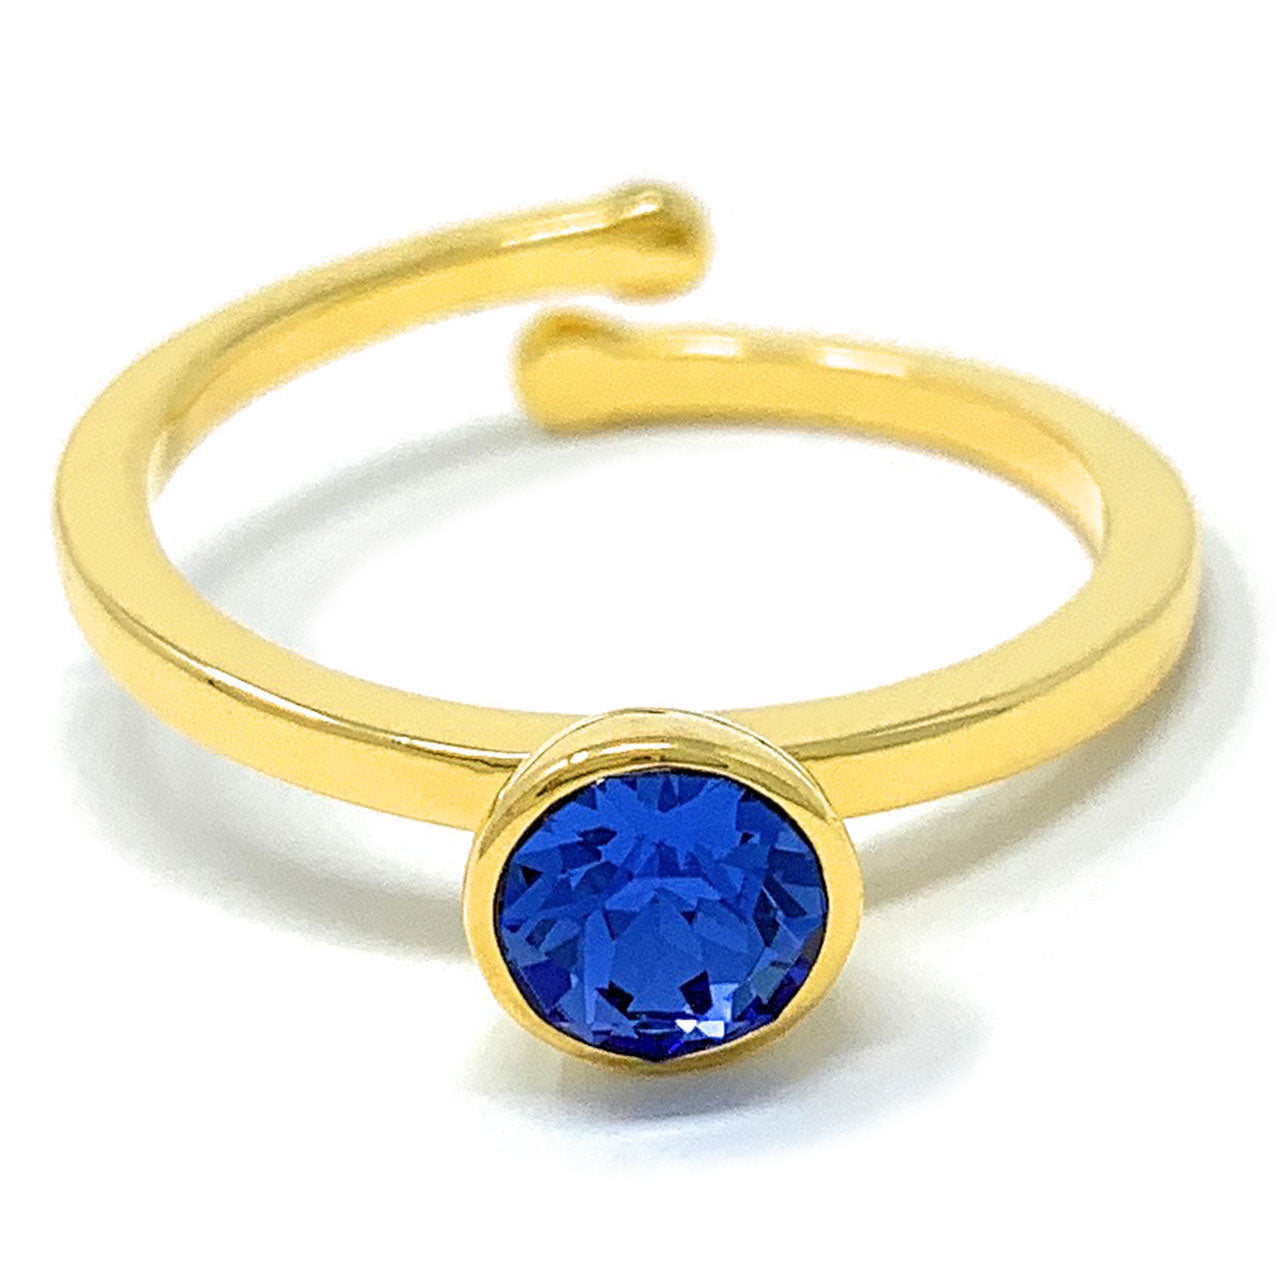 Harley Adjustable Ring with Blue Sapphire Round Crystals from Swarovski Gold Plated - Ed Heart